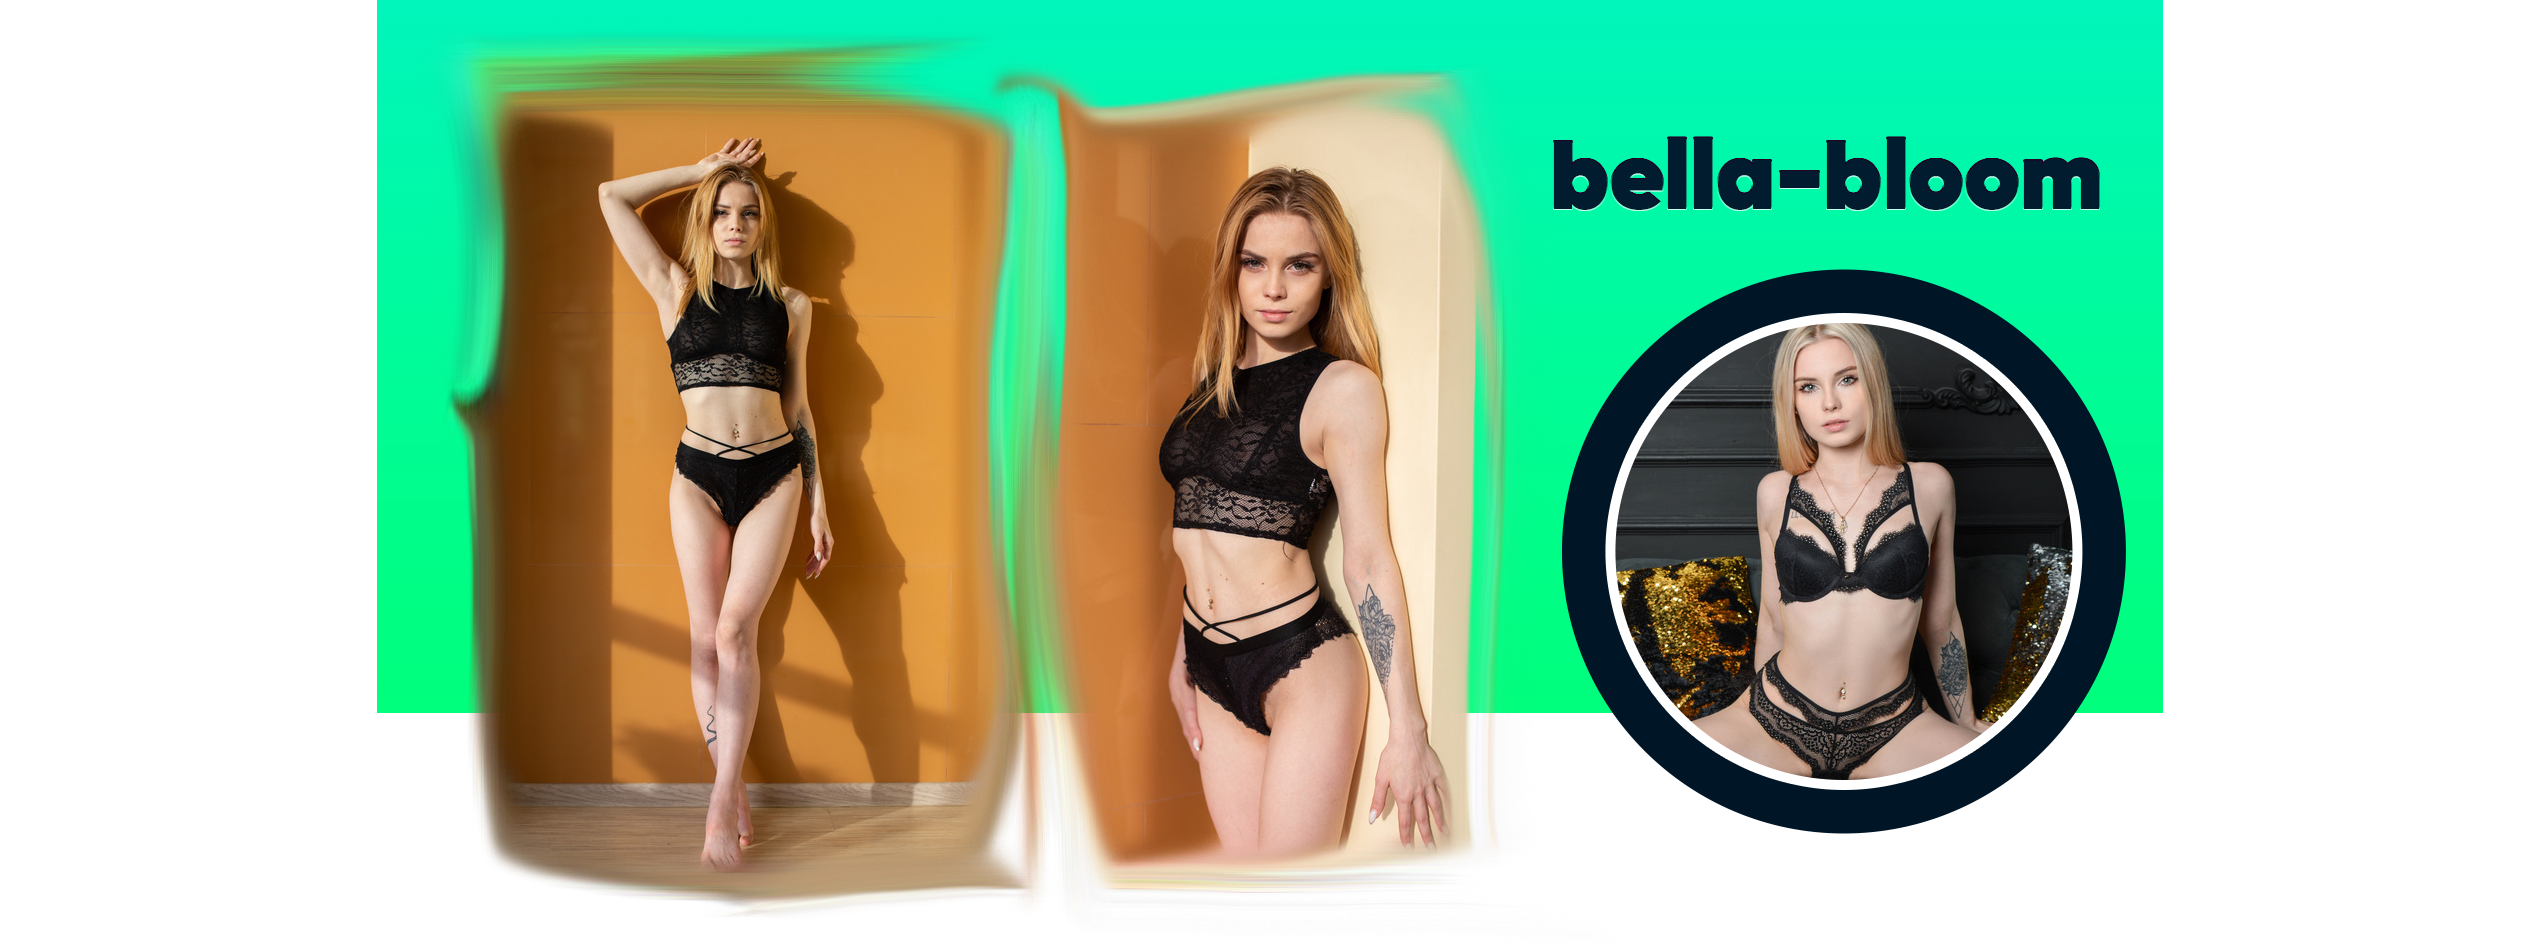 bella-bloom Hi guys. Let's meet and have some fun! I am the most passionate and depraved girl. image: 1